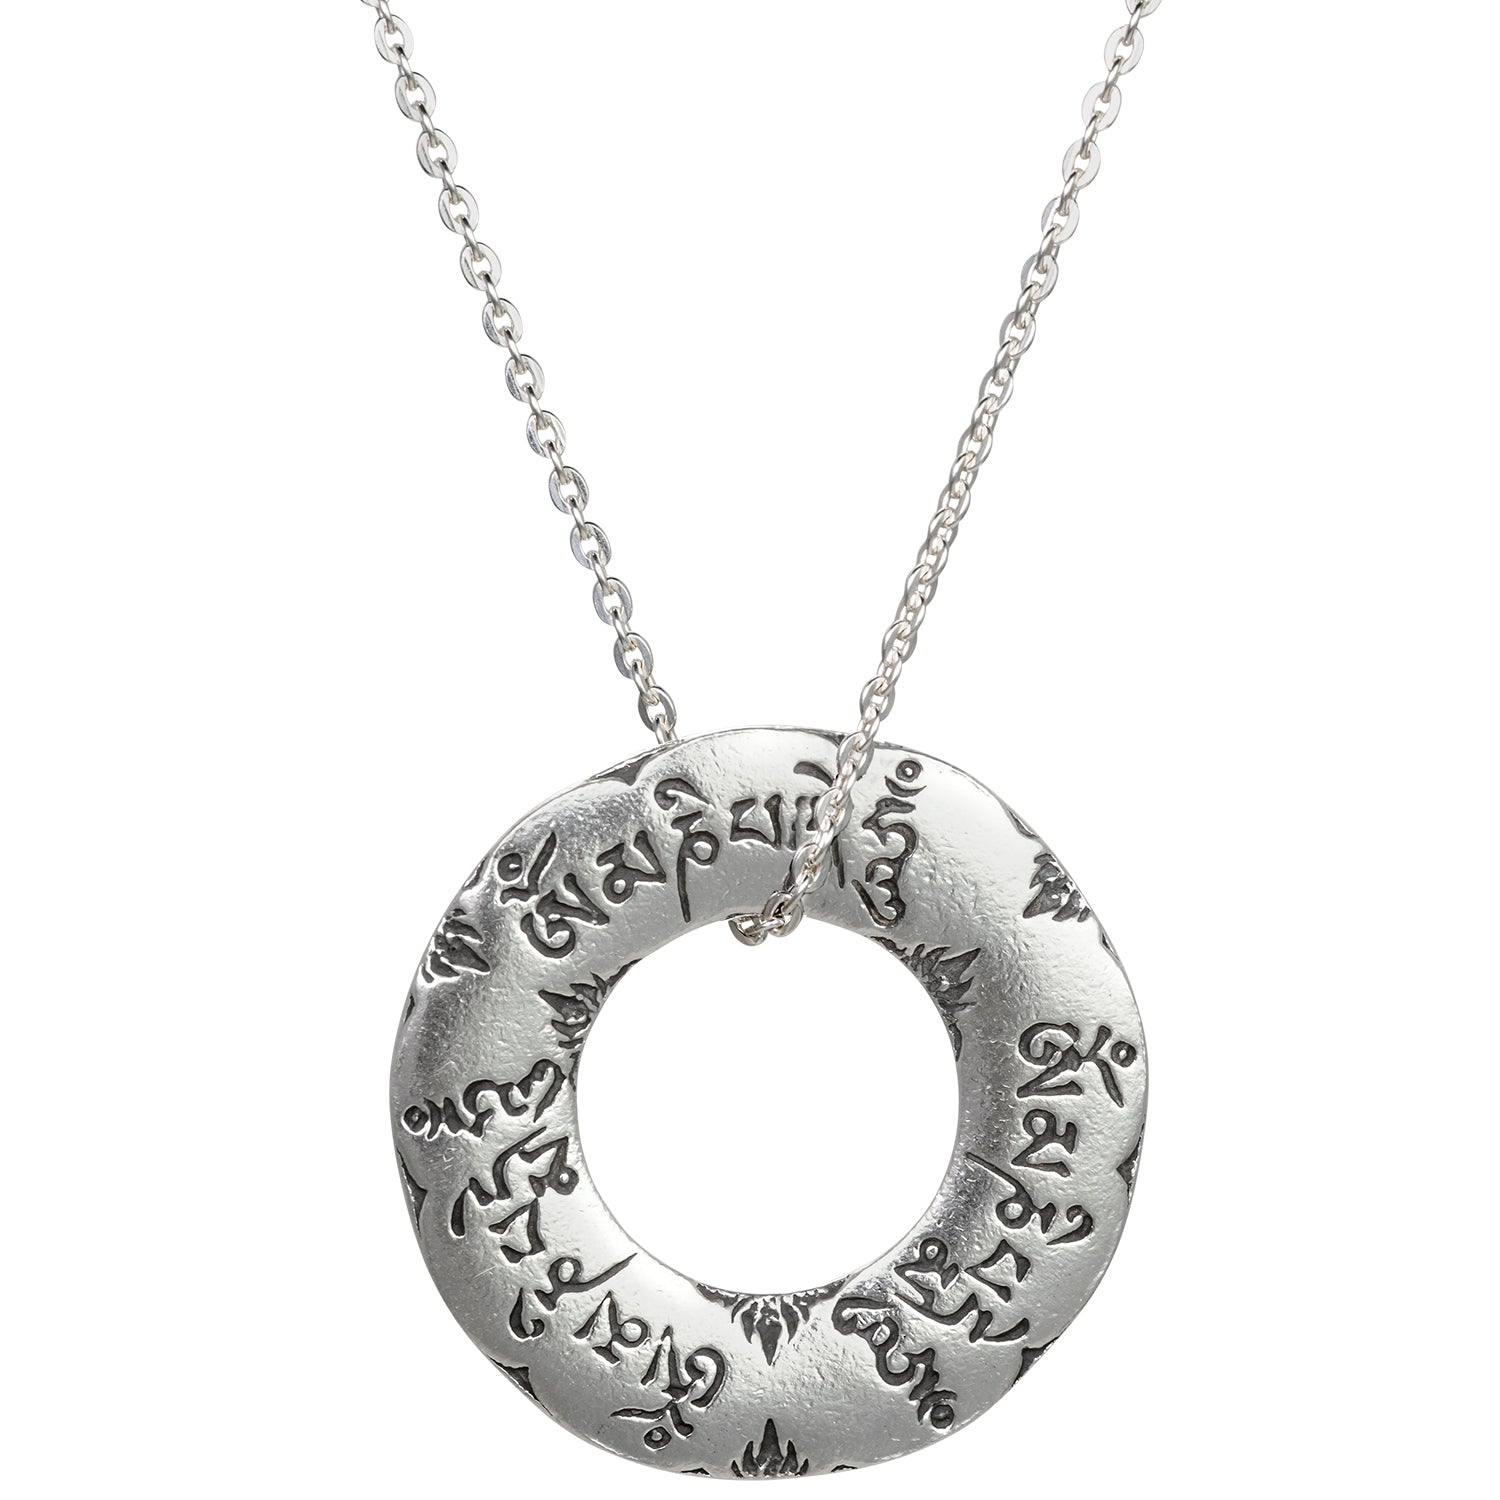 Om Mani Padme Hum Mantra necklace by ETERNAL BLISS - Spiritual Jewellery